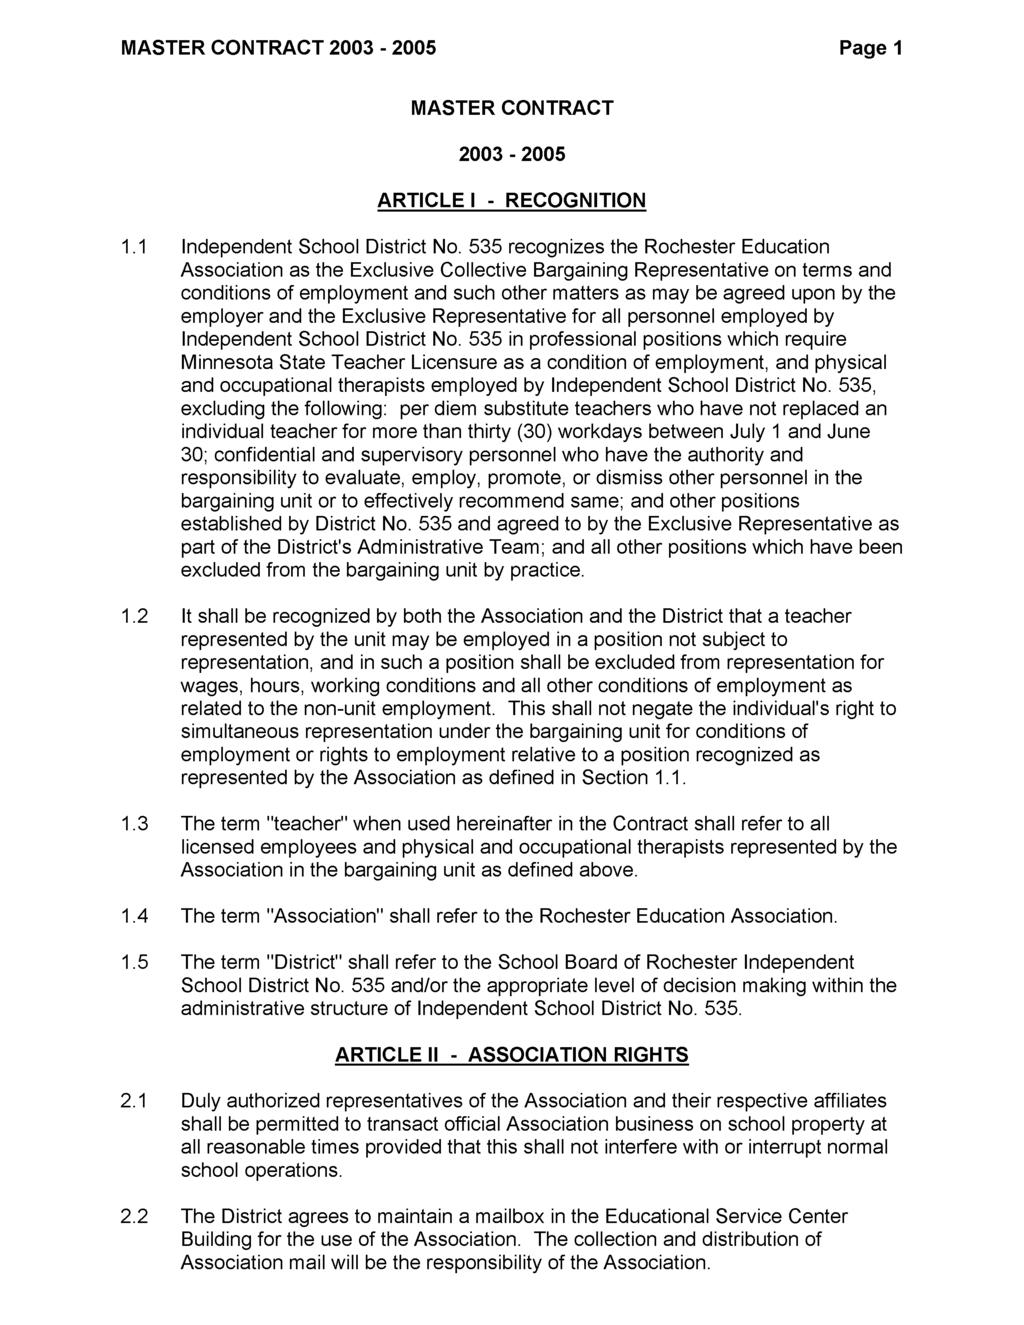 MASTER CONTRACT 2003-2005 Page 1 MASTER CONTRACT 2003-2005 ARTICLE I - RECOGNITION 1.1 Independent School District No.